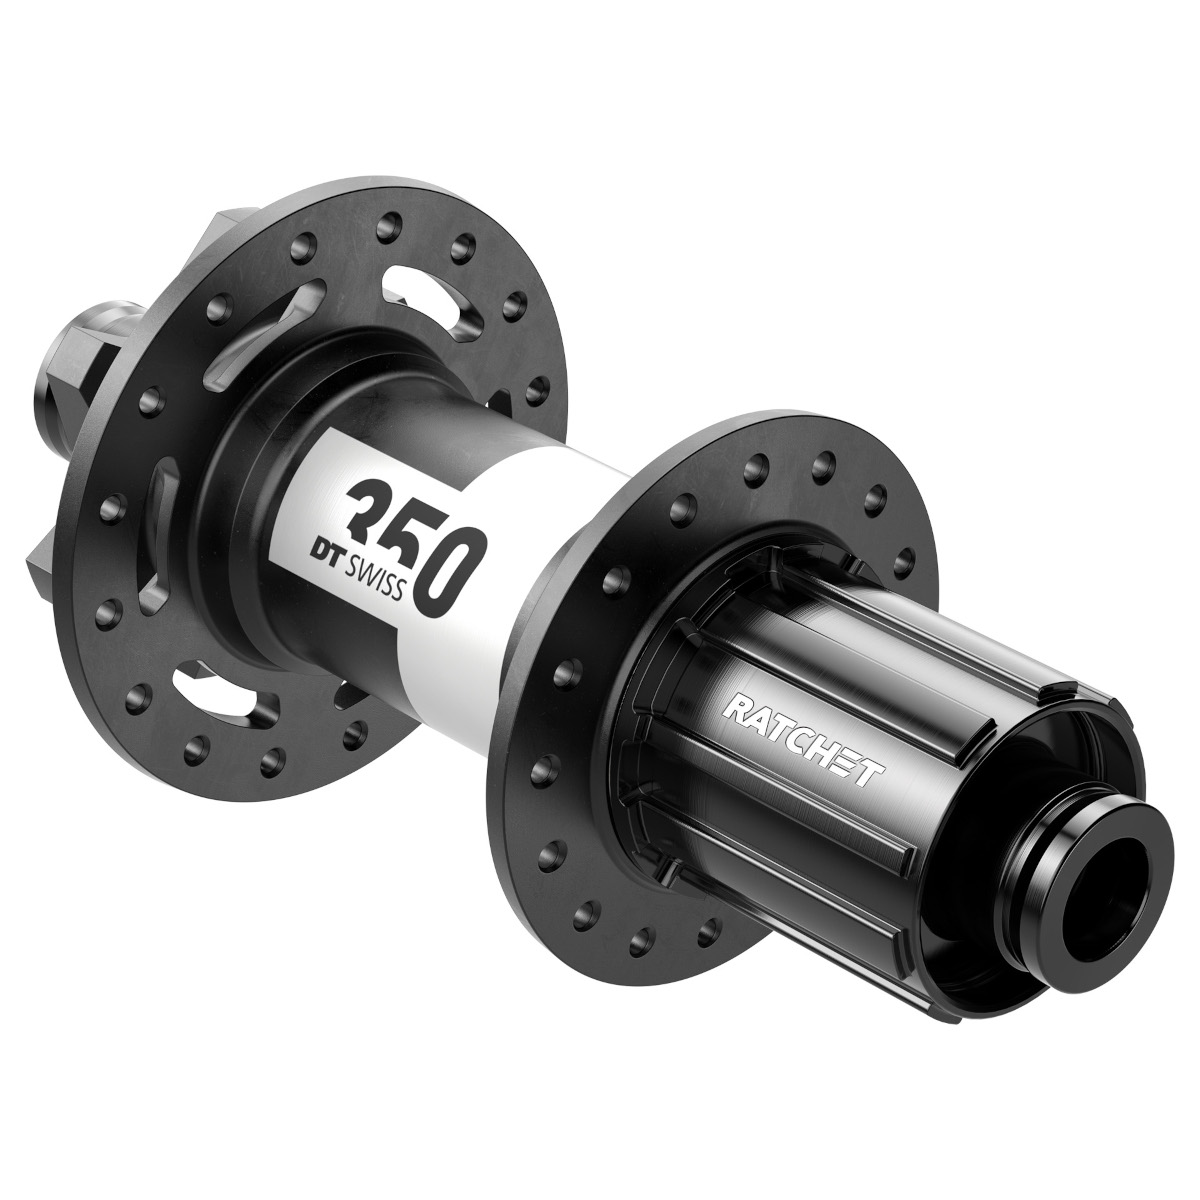 Picture of DT Swiss 350 Classic Rear Hub - 6-Bolt - 12x142mm - Shimano HG